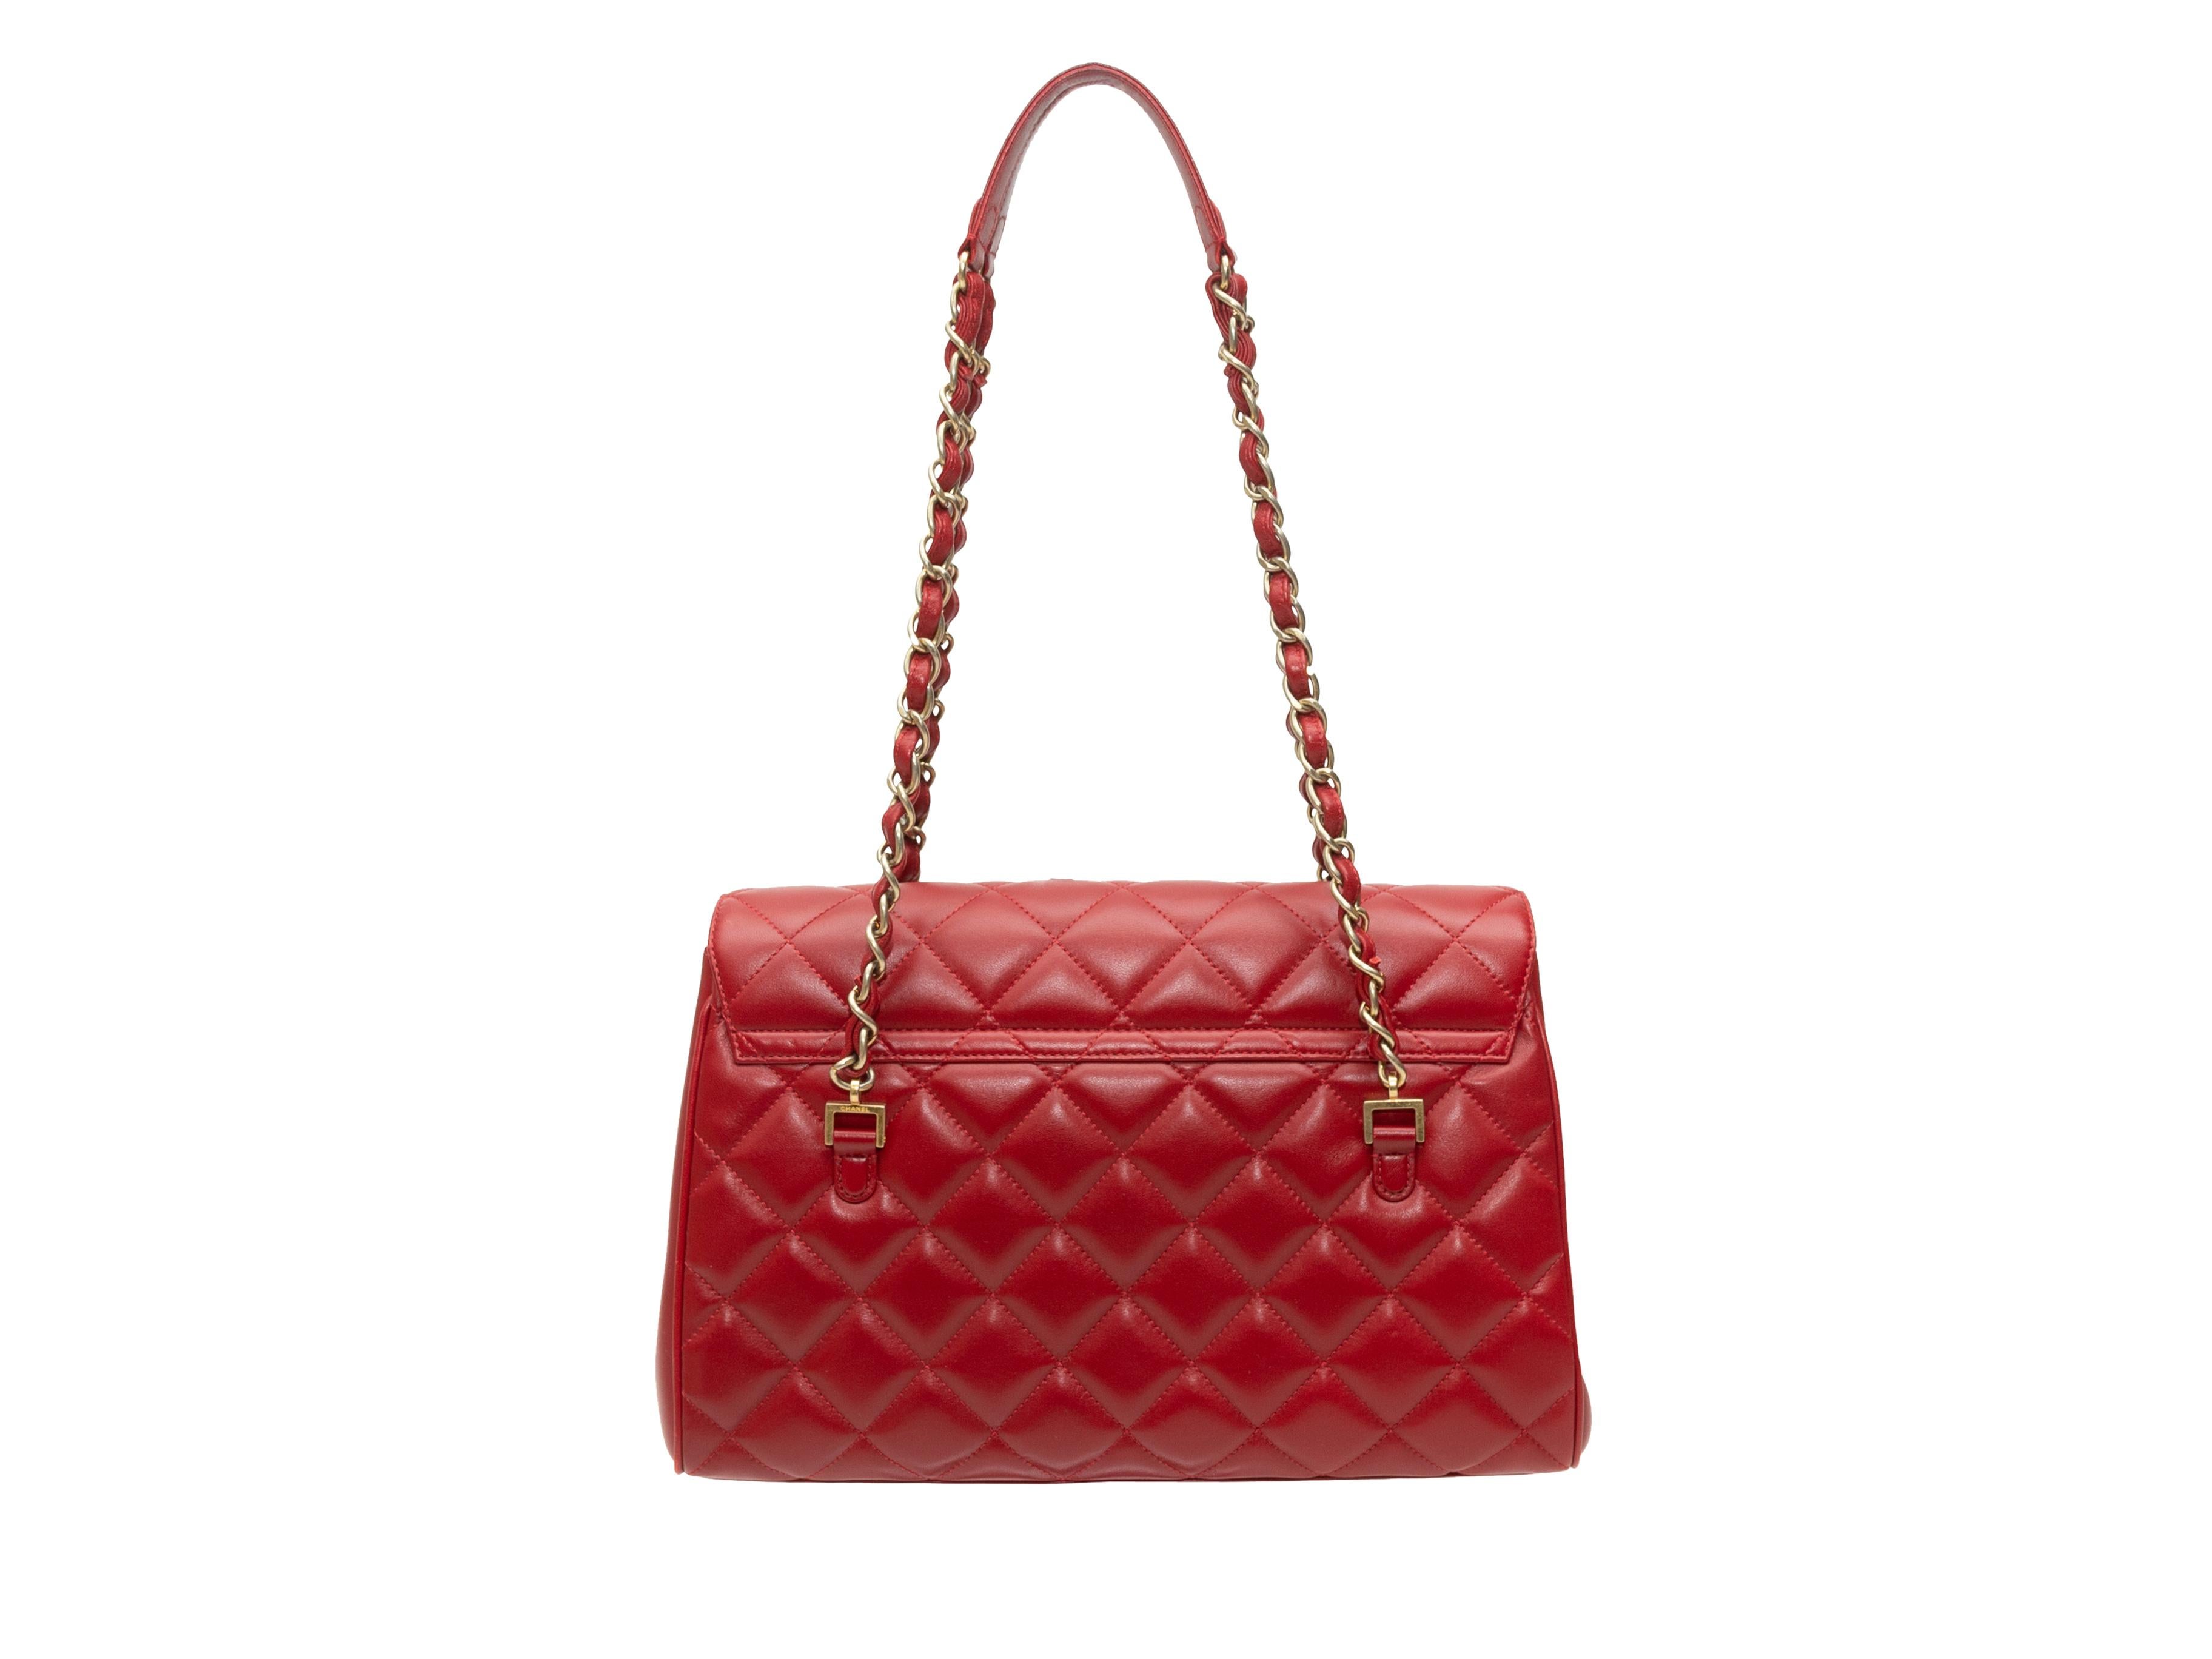 Chanel Red Quilted Leather Flap Bag 1